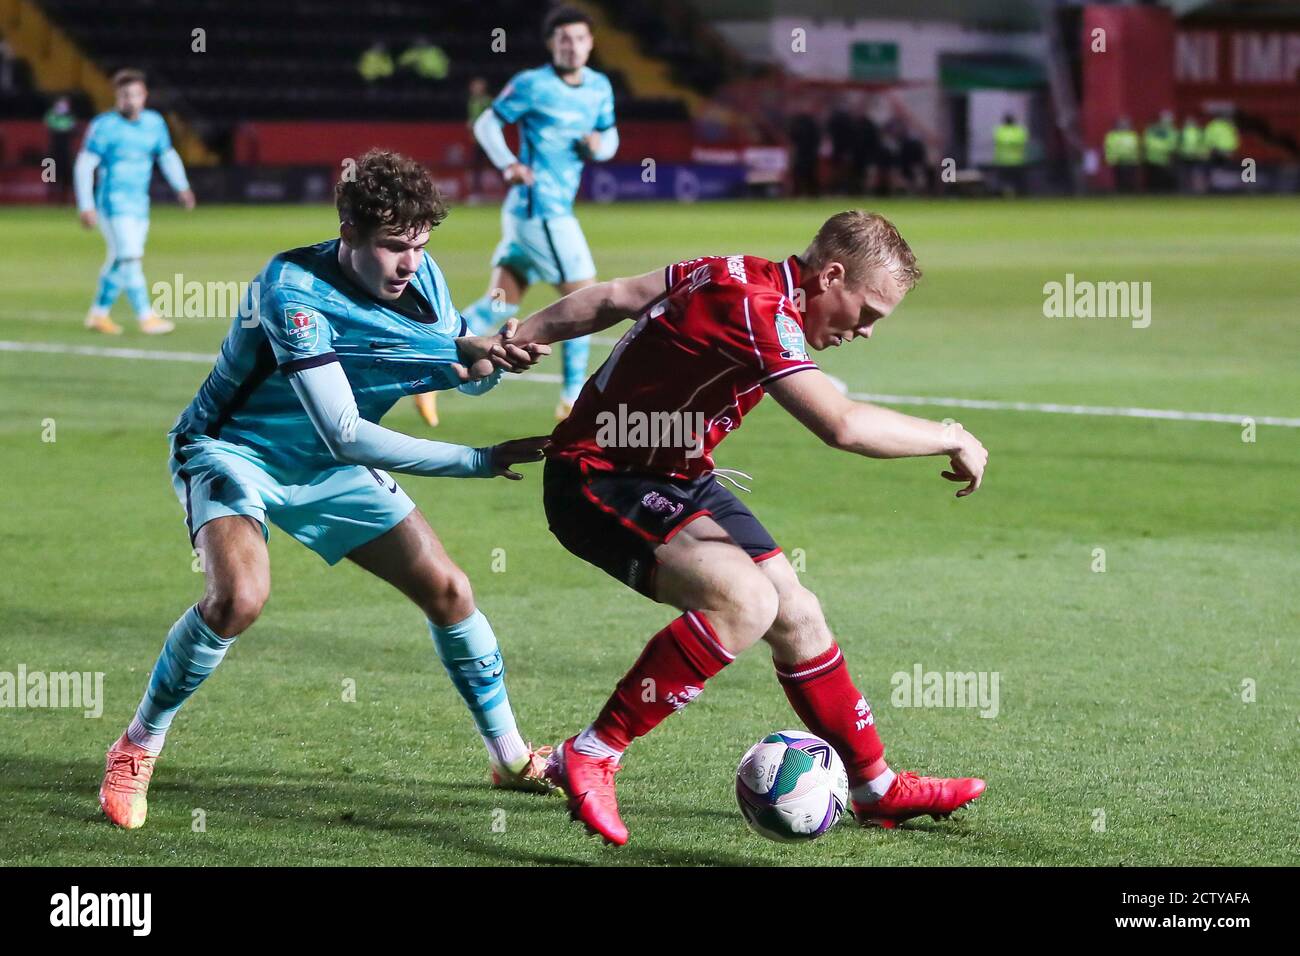 Lincoln City forward Anthony Scully (11) and Liverpool defender Neco Williams (76) during the English League Cup, EFL Carabao Cup, football match betw Stock Photo